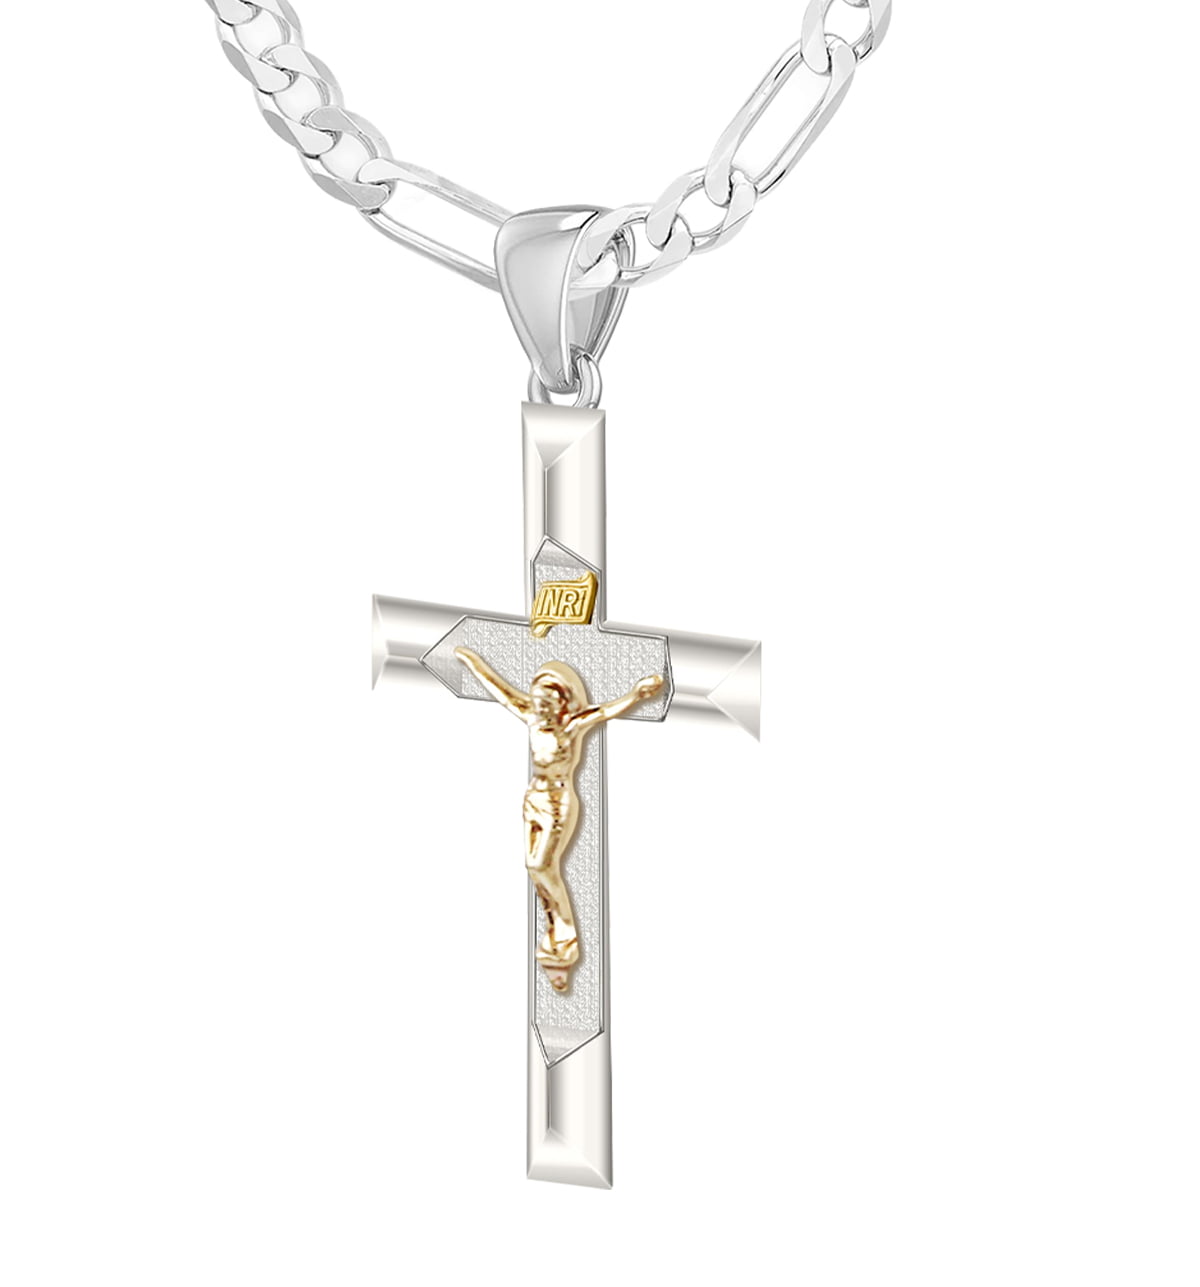 925 Sterling Silver Polished Crucifix Charm Pendant